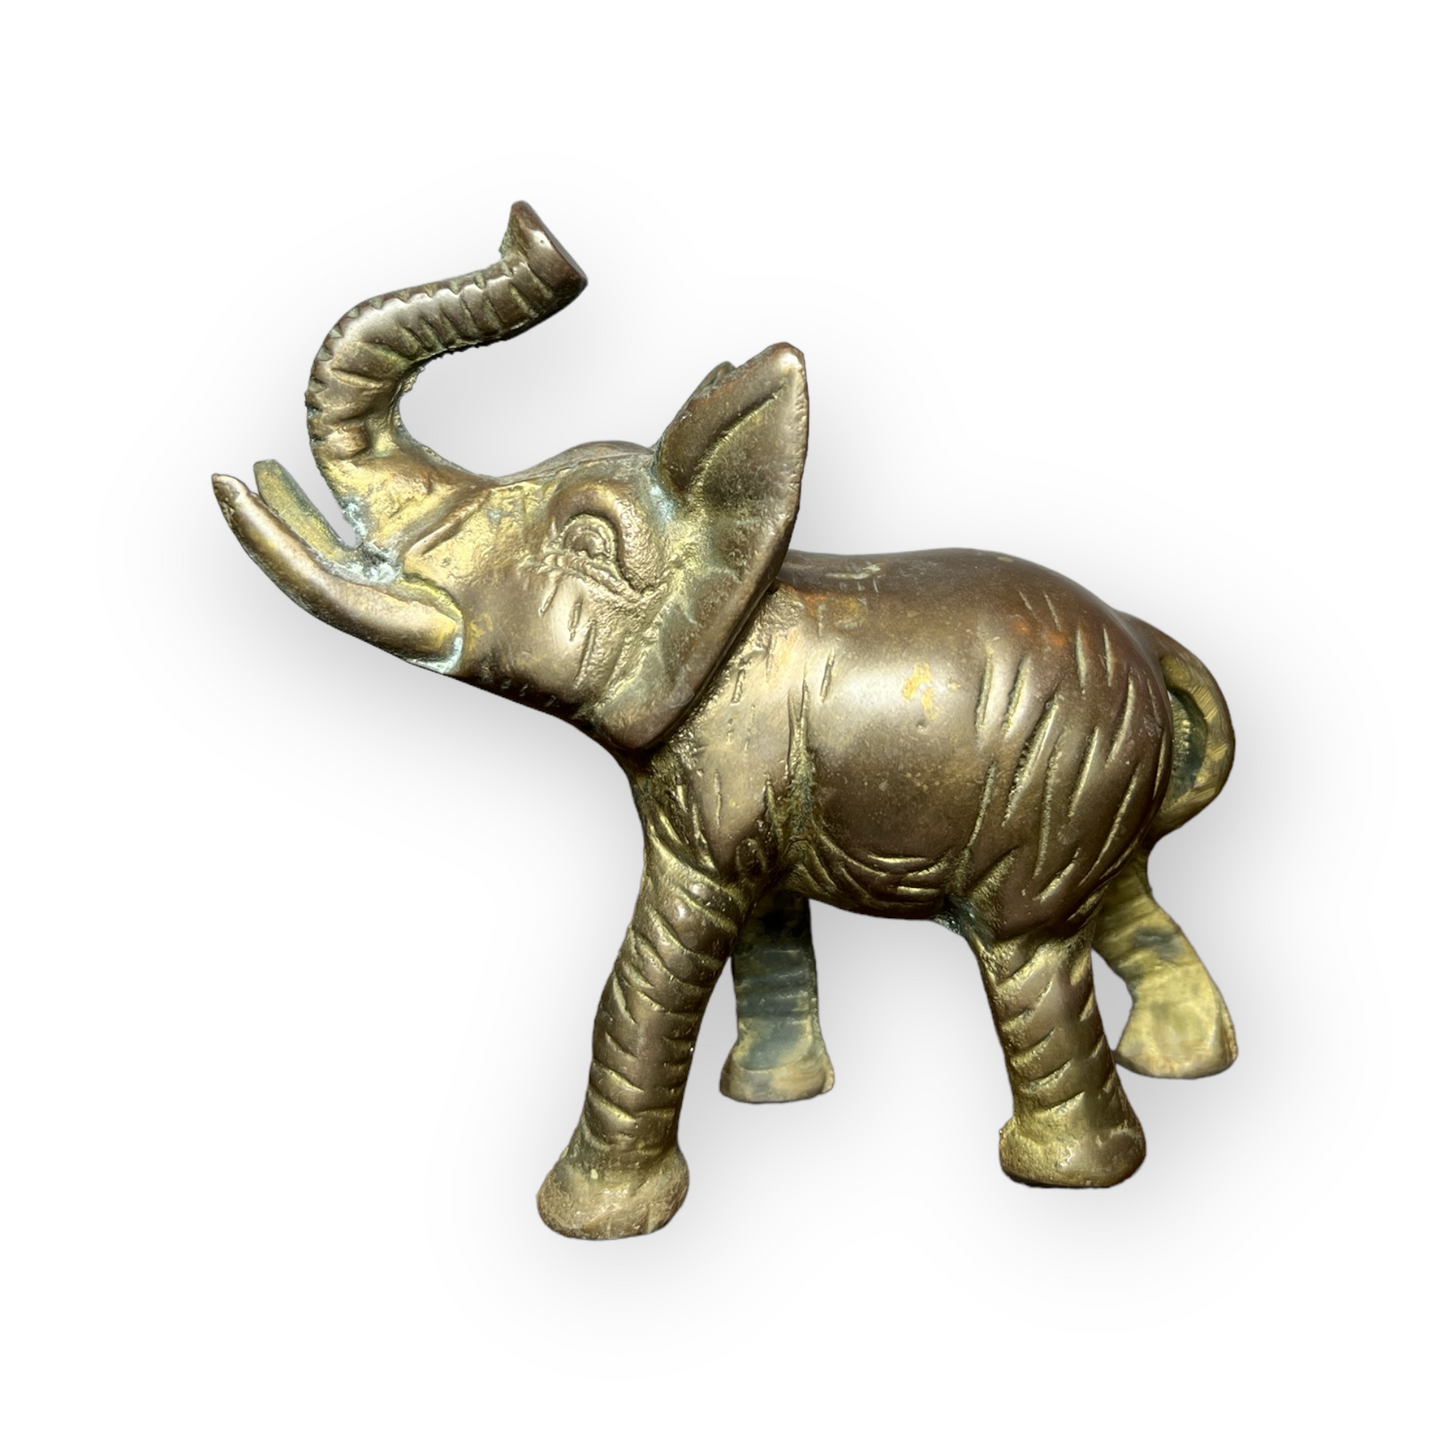 Vintage Solid Brass Elephant with Raised Trunk - 4.75 inches Tall